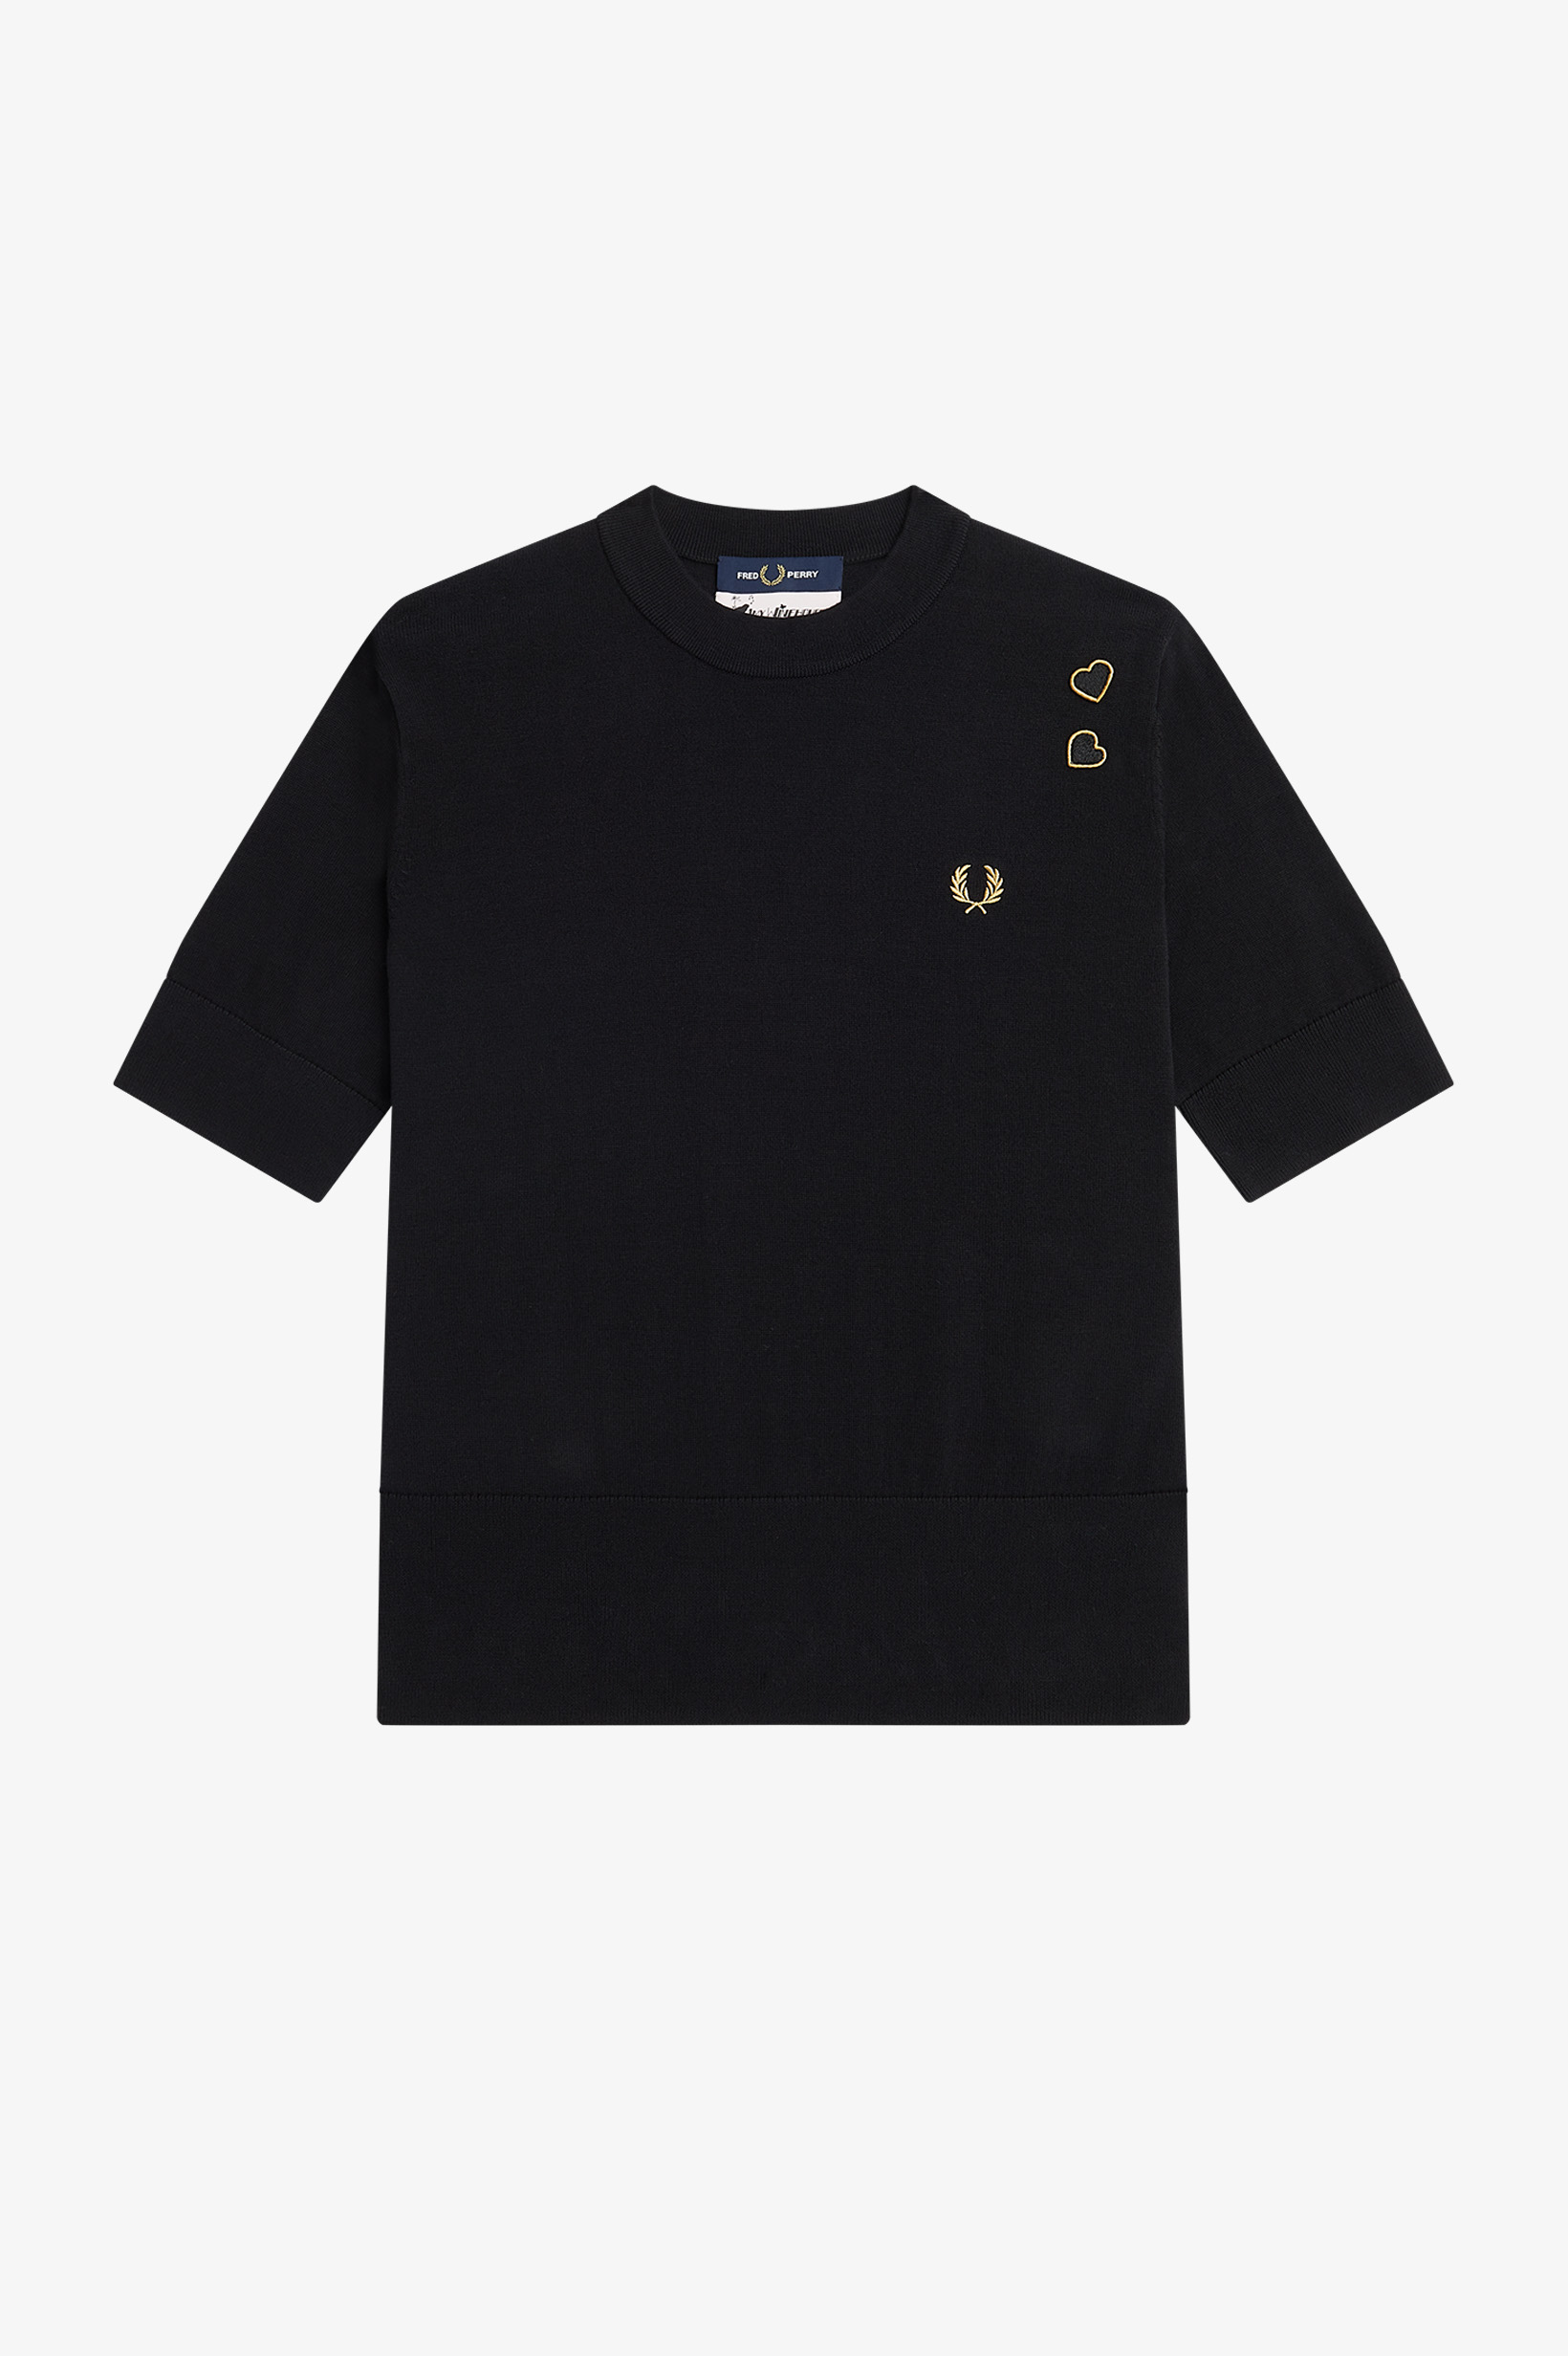 Fred Perry Amy Winehouse Foundation Short Sleeve Jumper Black